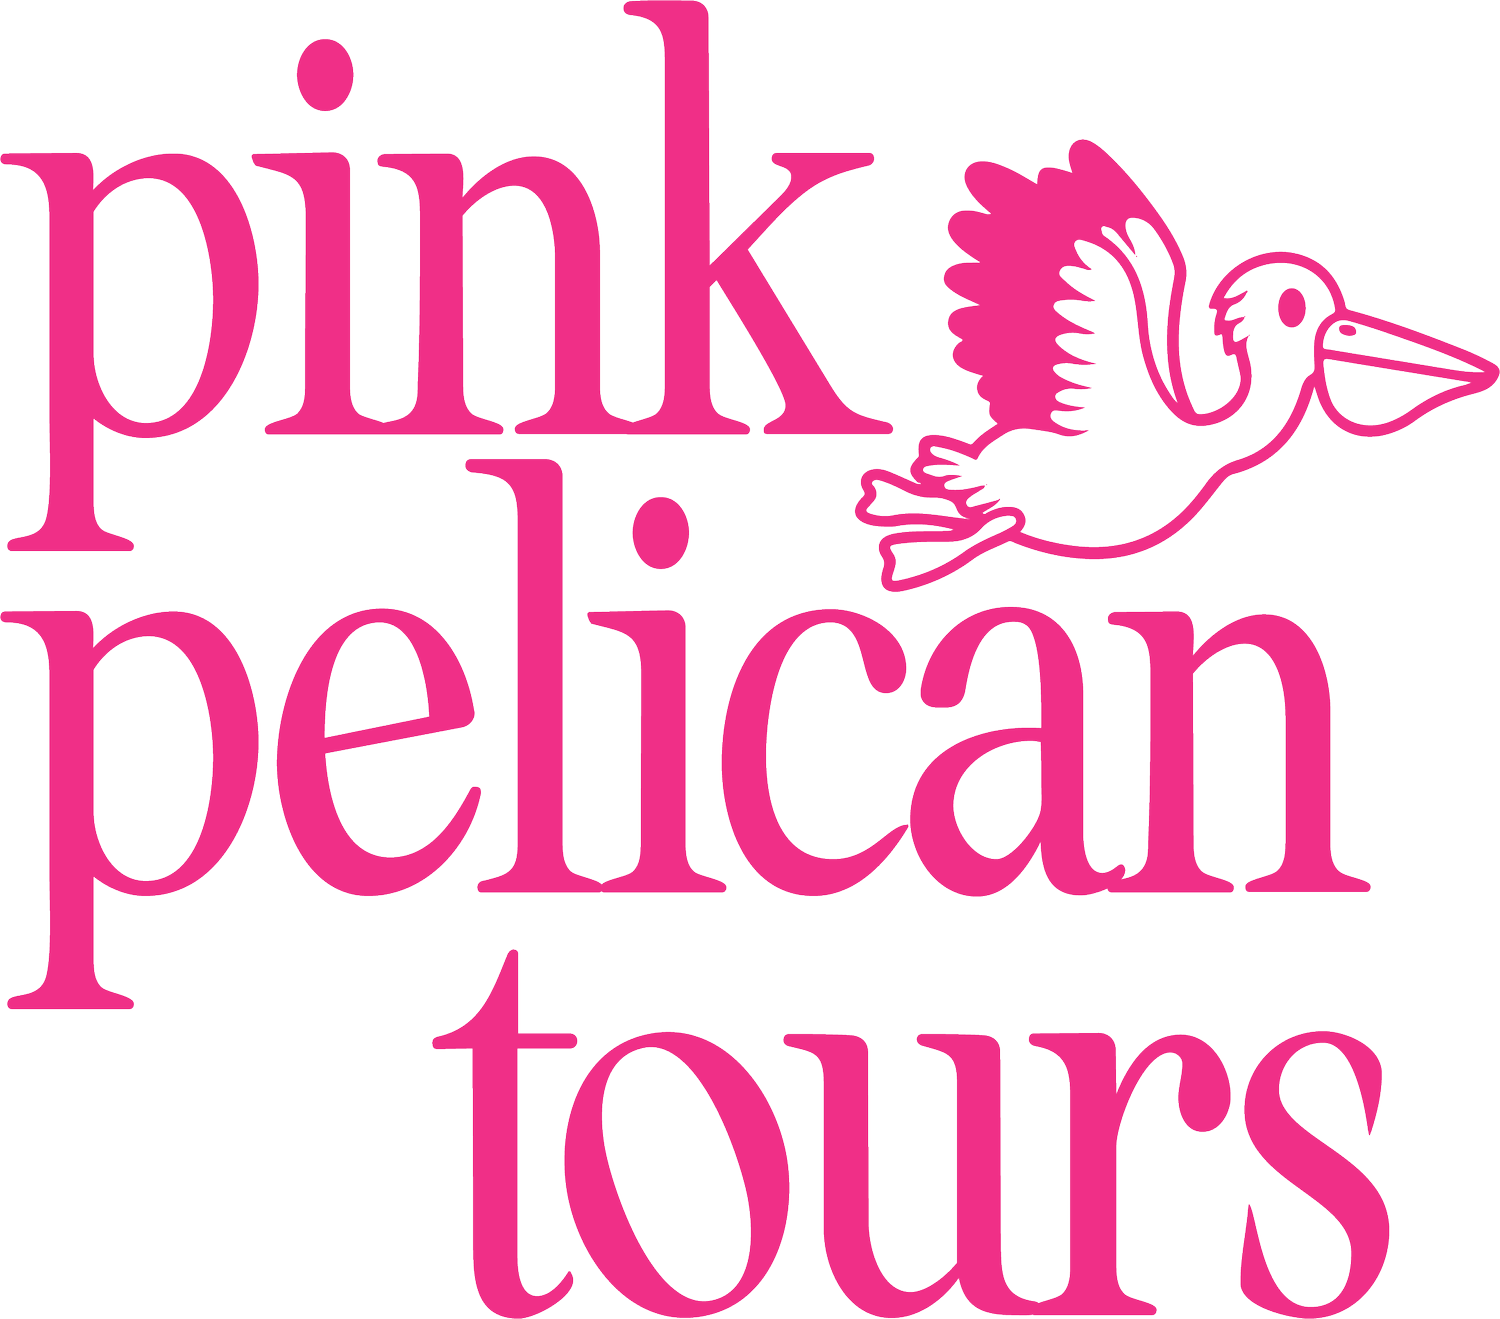 Pink Pelican Tours | Specialised International Tours for Small Groups